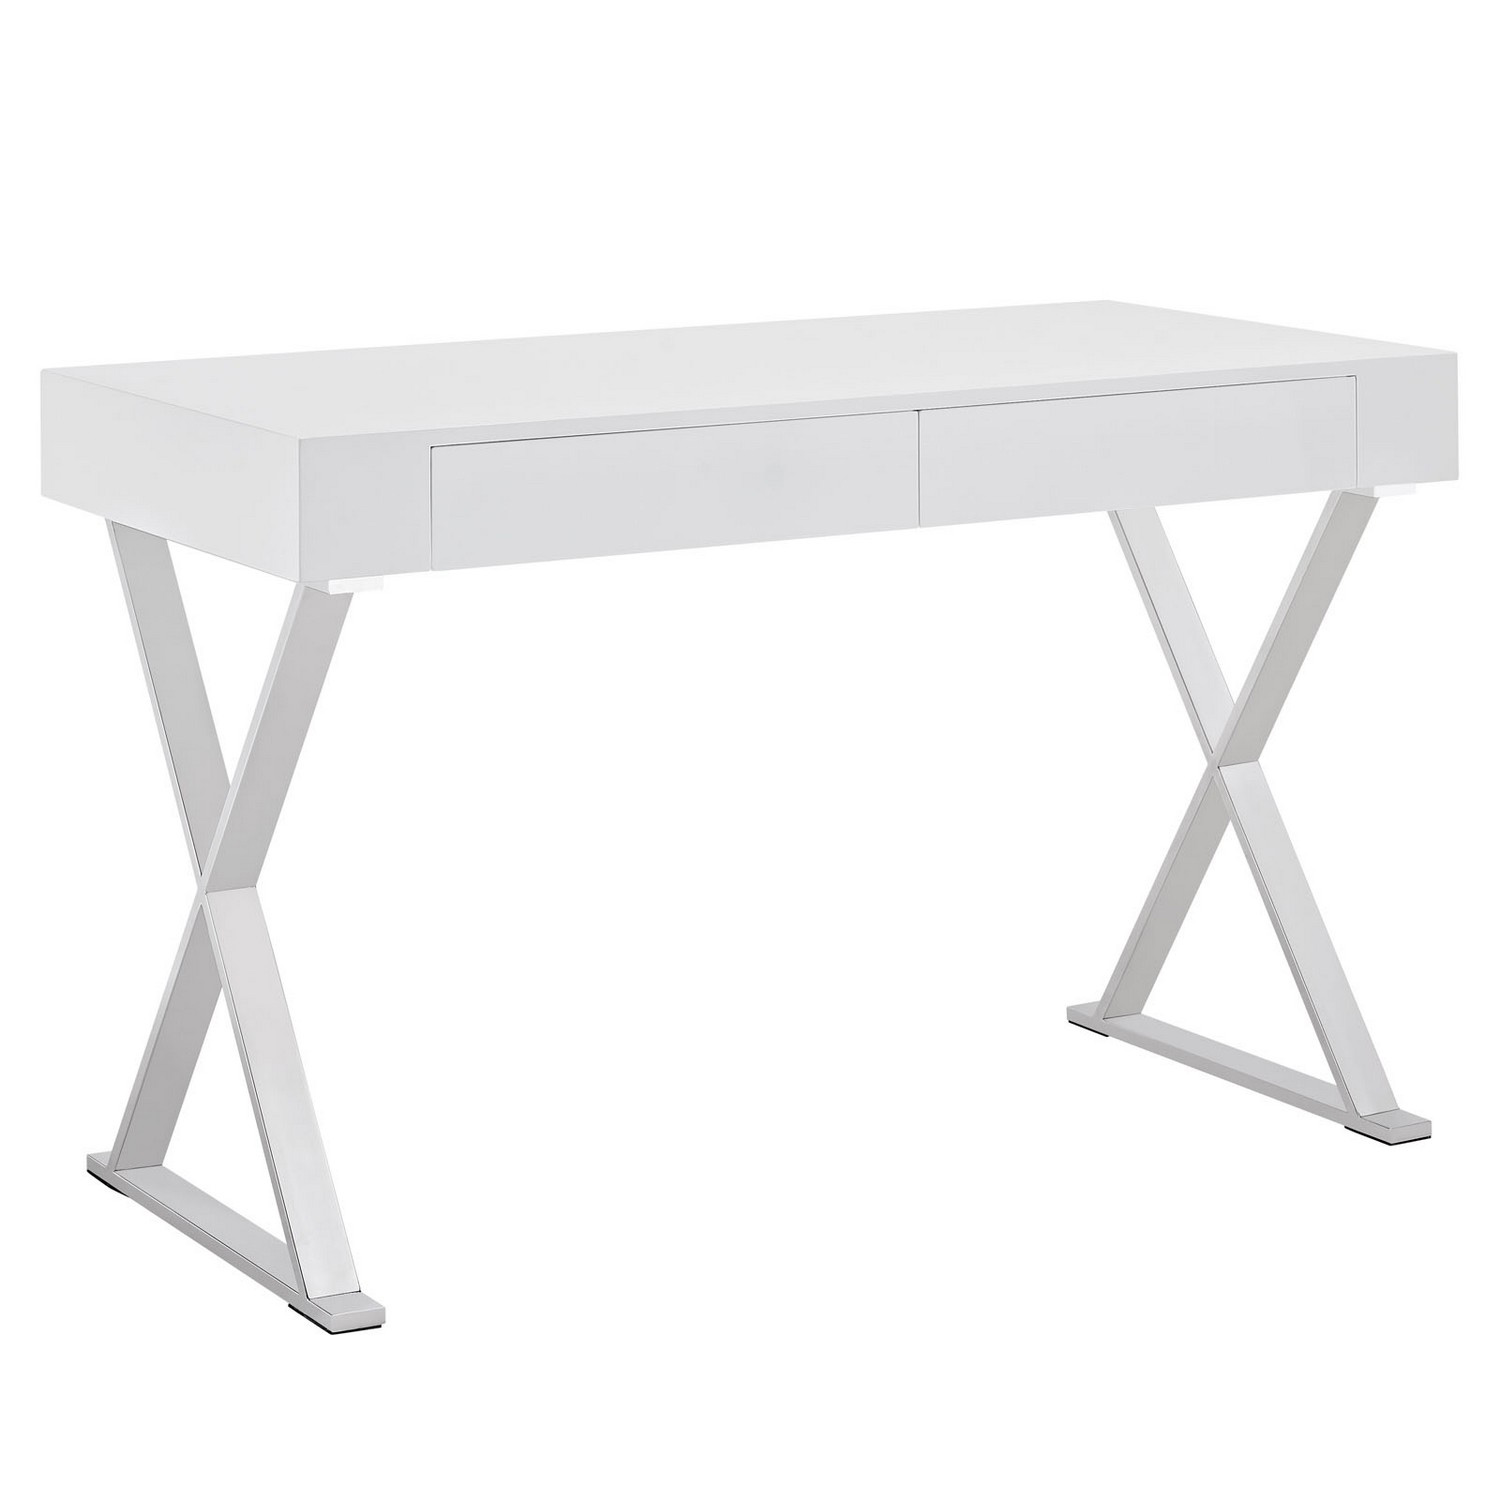 Modway Sector Office Desk - White